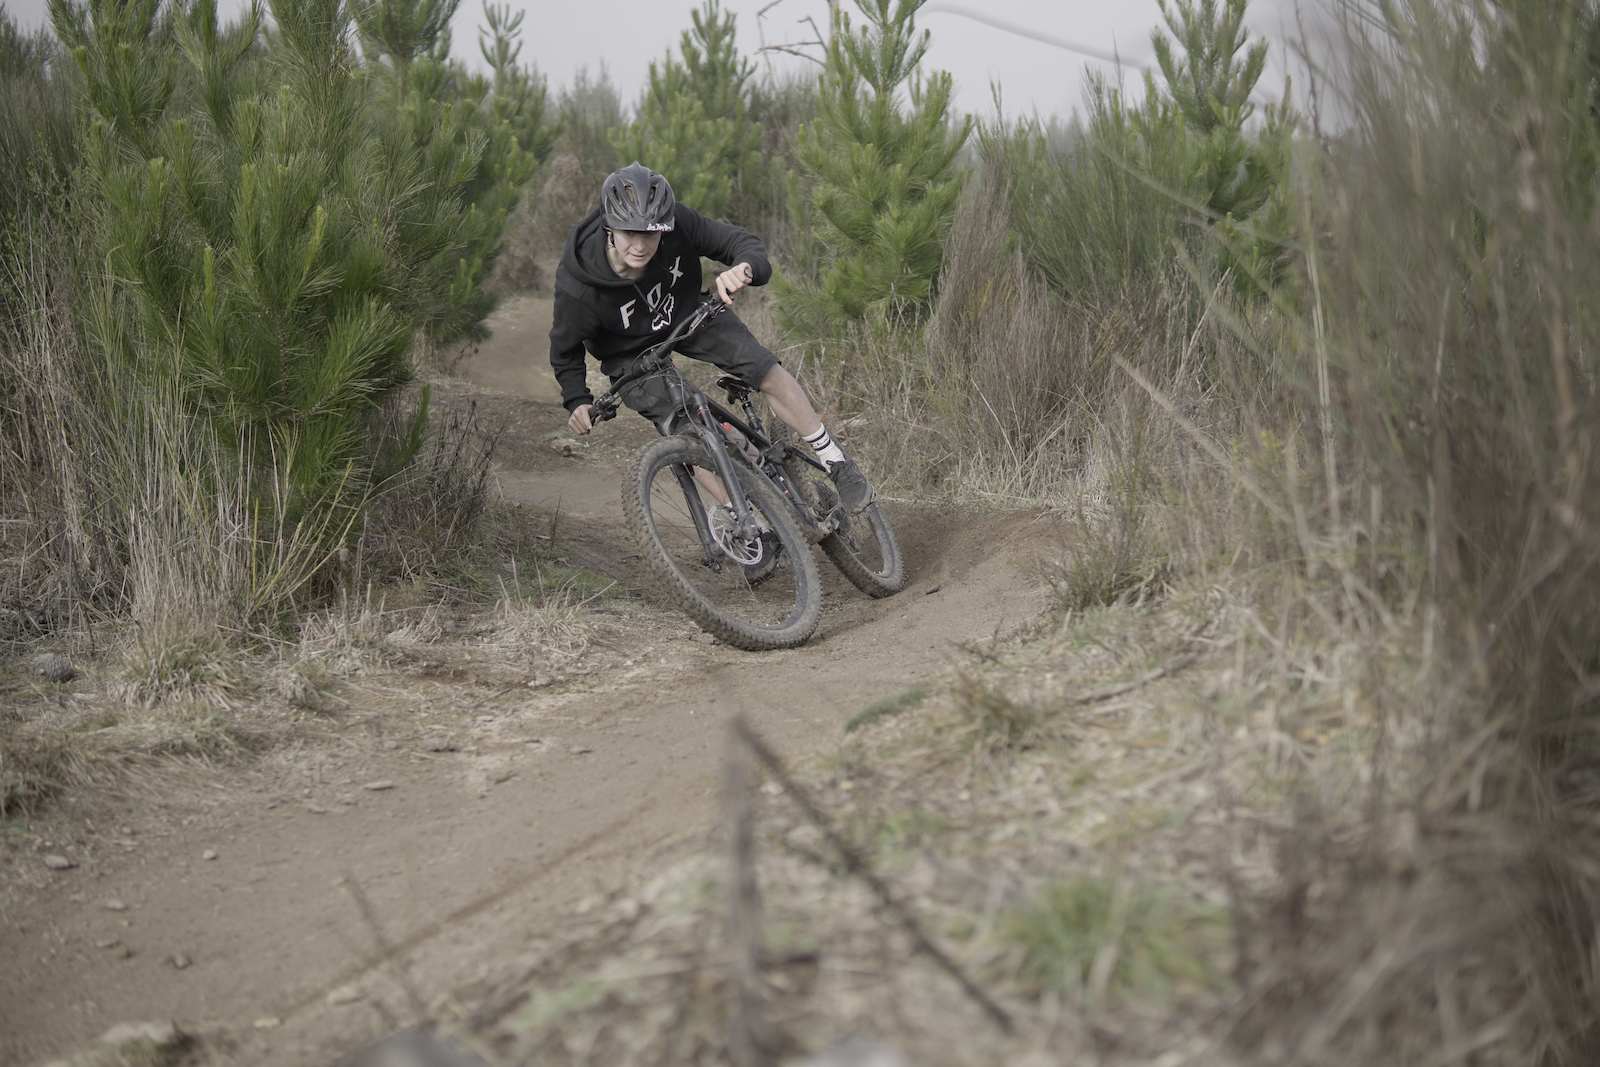 This Kid has a skill for destroying tires and berms, a pleasant thought for all bike mechanics and trail builders alike.